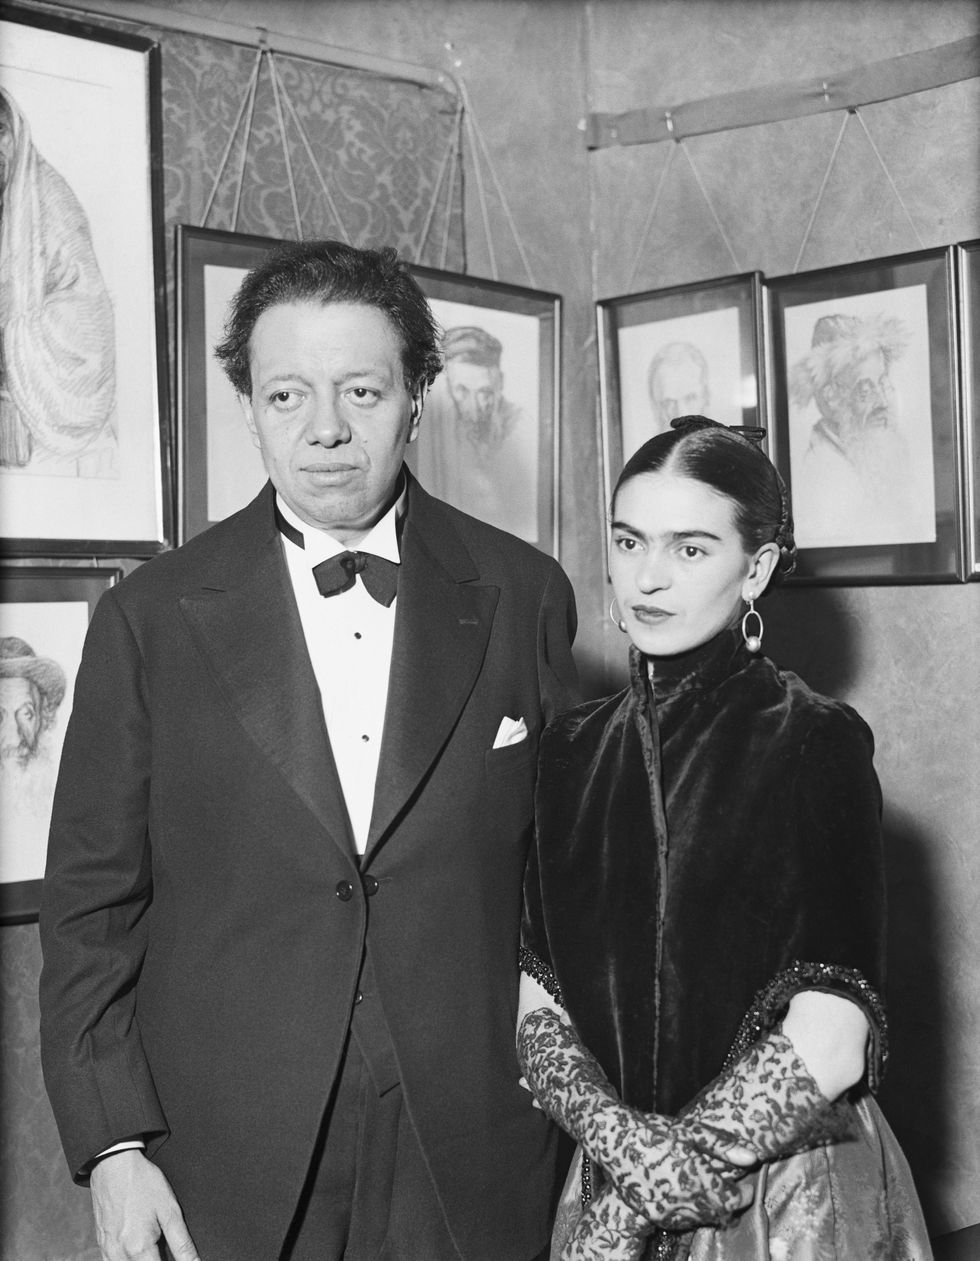 artists diego rivera and frida kahlo visit an art gallery exhibition of jewish portraits by lionel reiss in new york